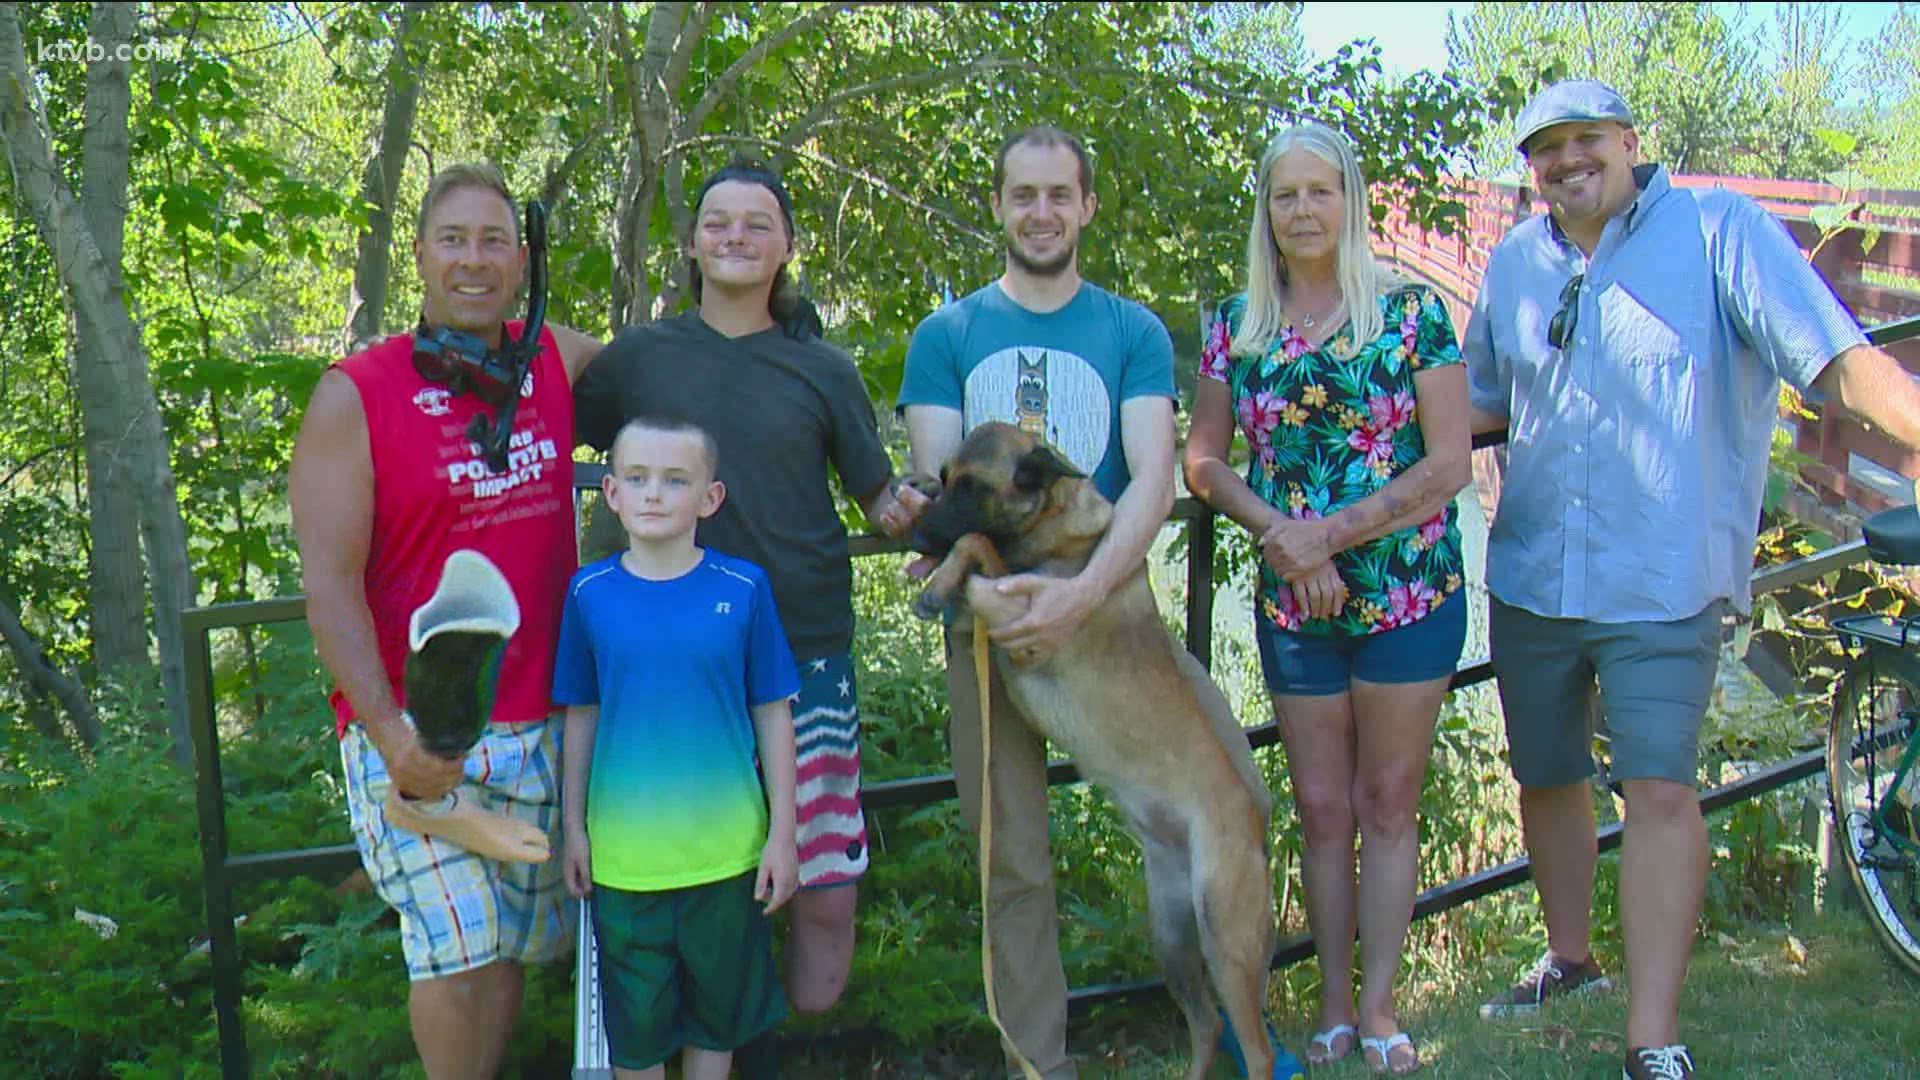 The man lost his titanium prosthetic while floating down the Boise River and soon three men jumped in to help with his mother's pleas to find the leg.